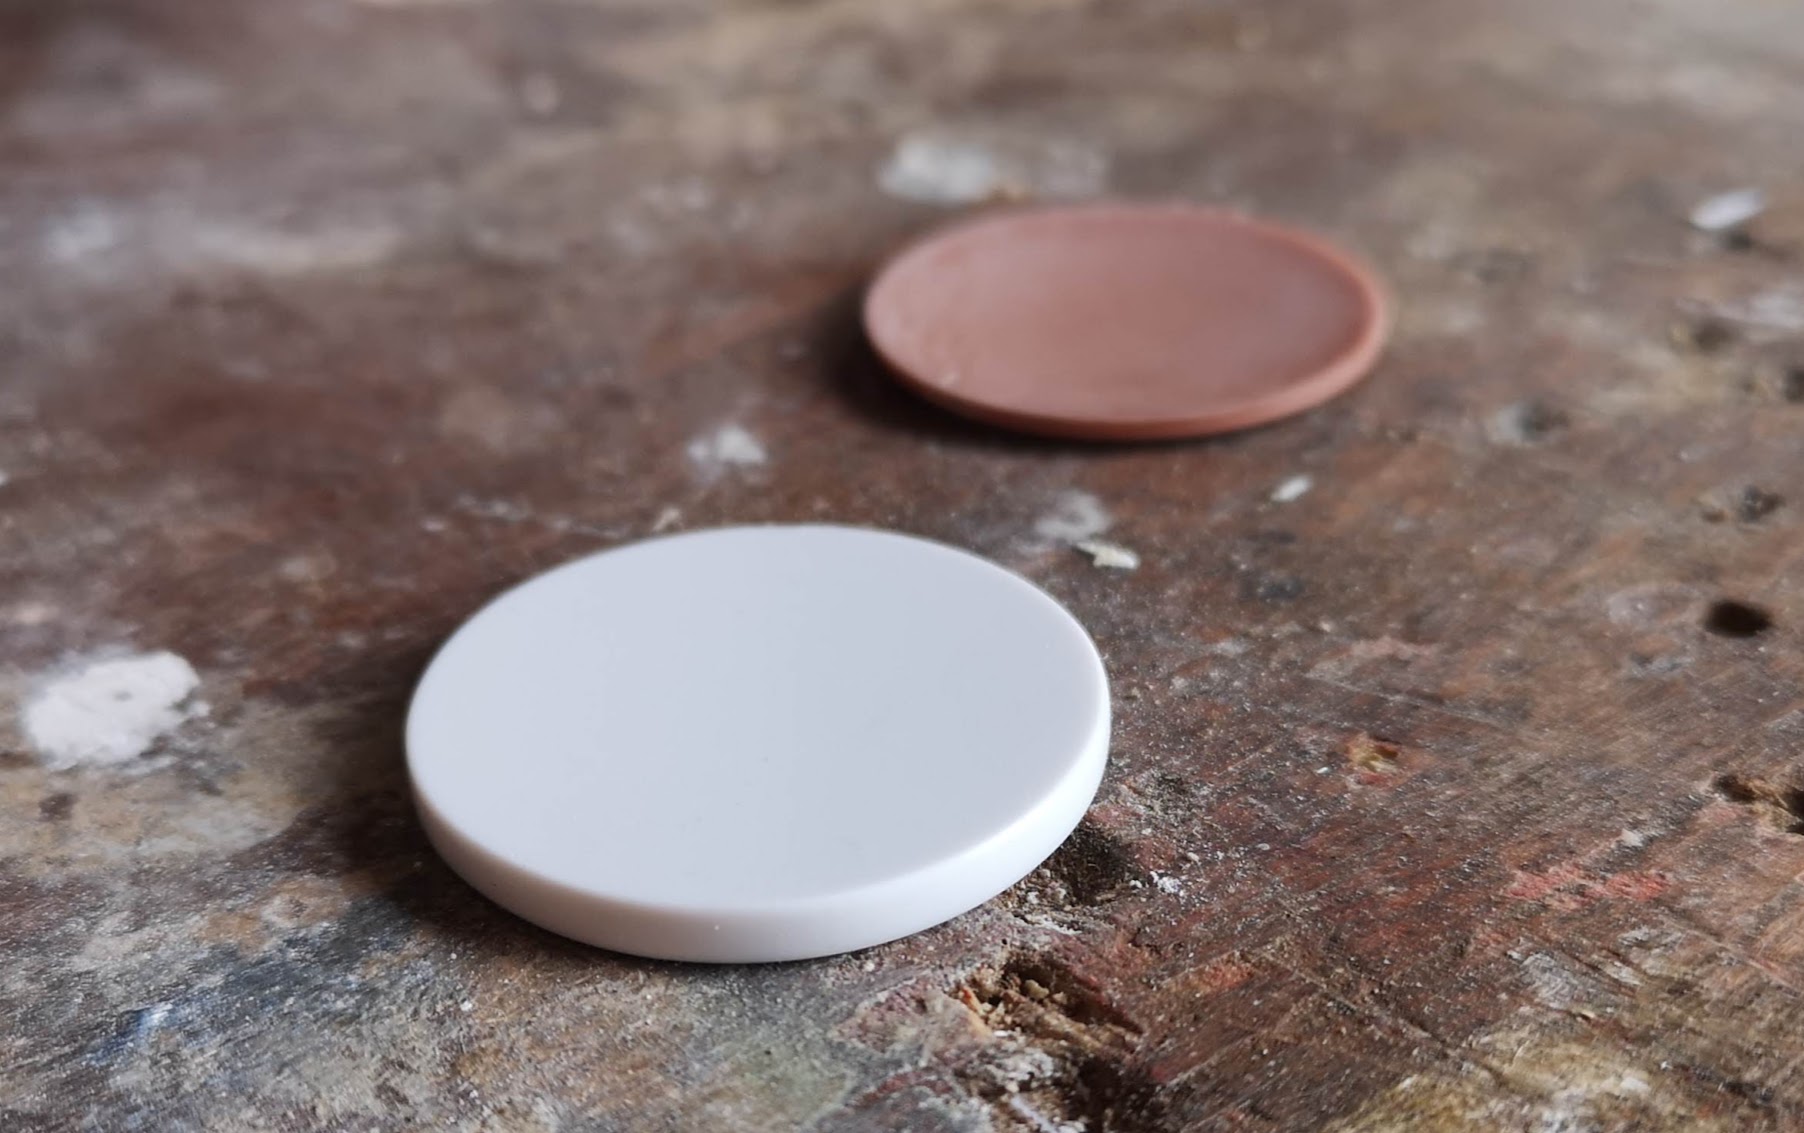 The polished button